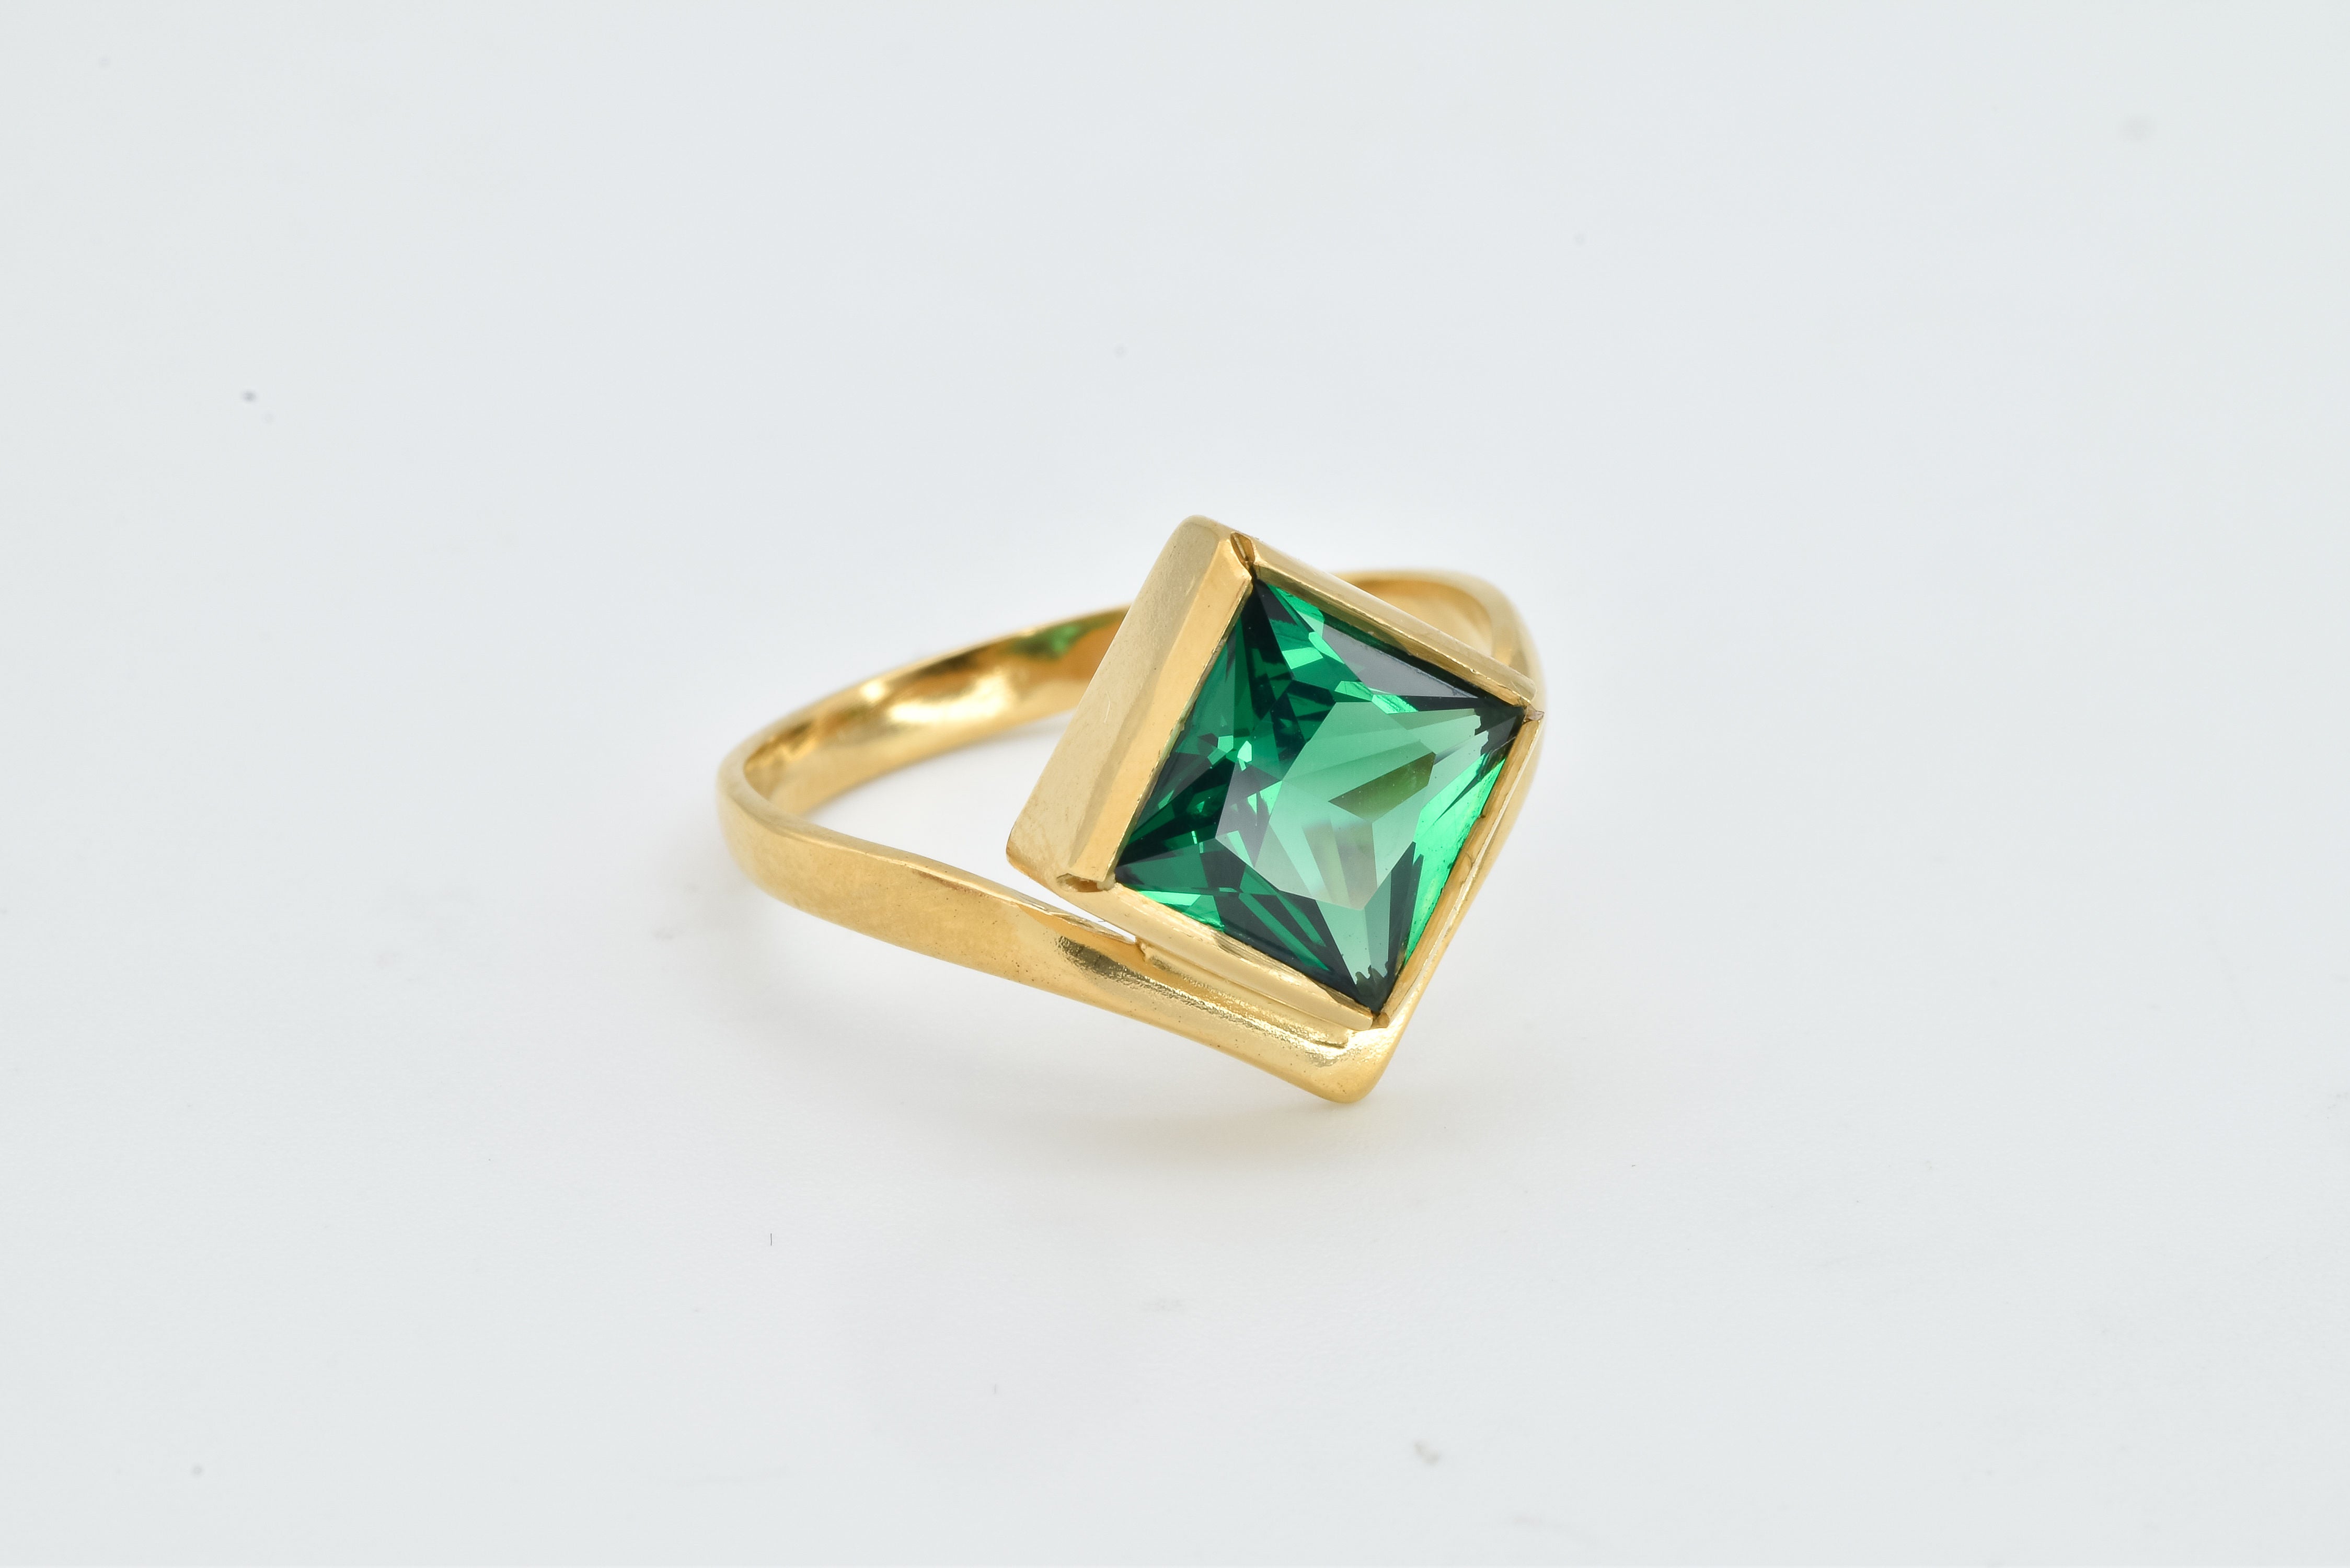 Gold Emerald Ring - Vintage Emerald Ring, May Birthstone Ring